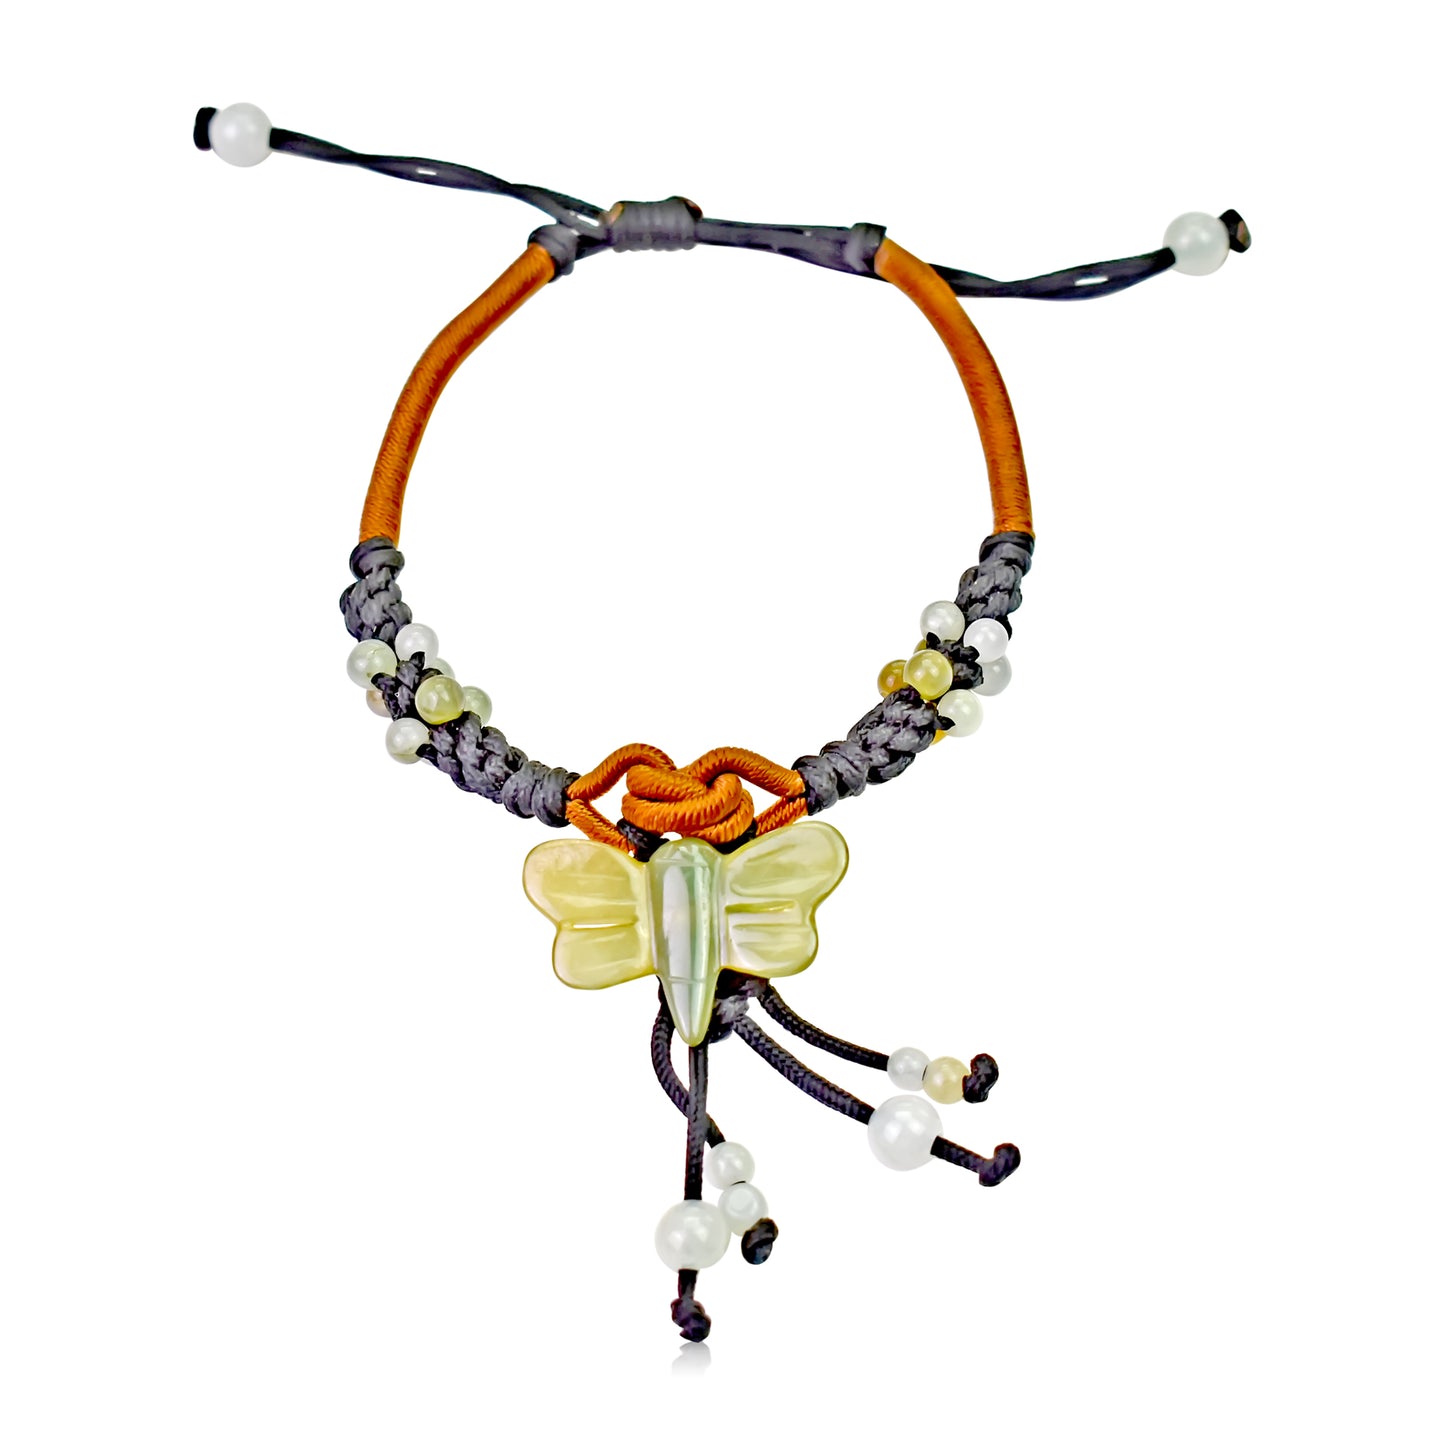 Get an Adjustable Dragonfly Jade Bracelet for a Perfect Fit made with Black Cord